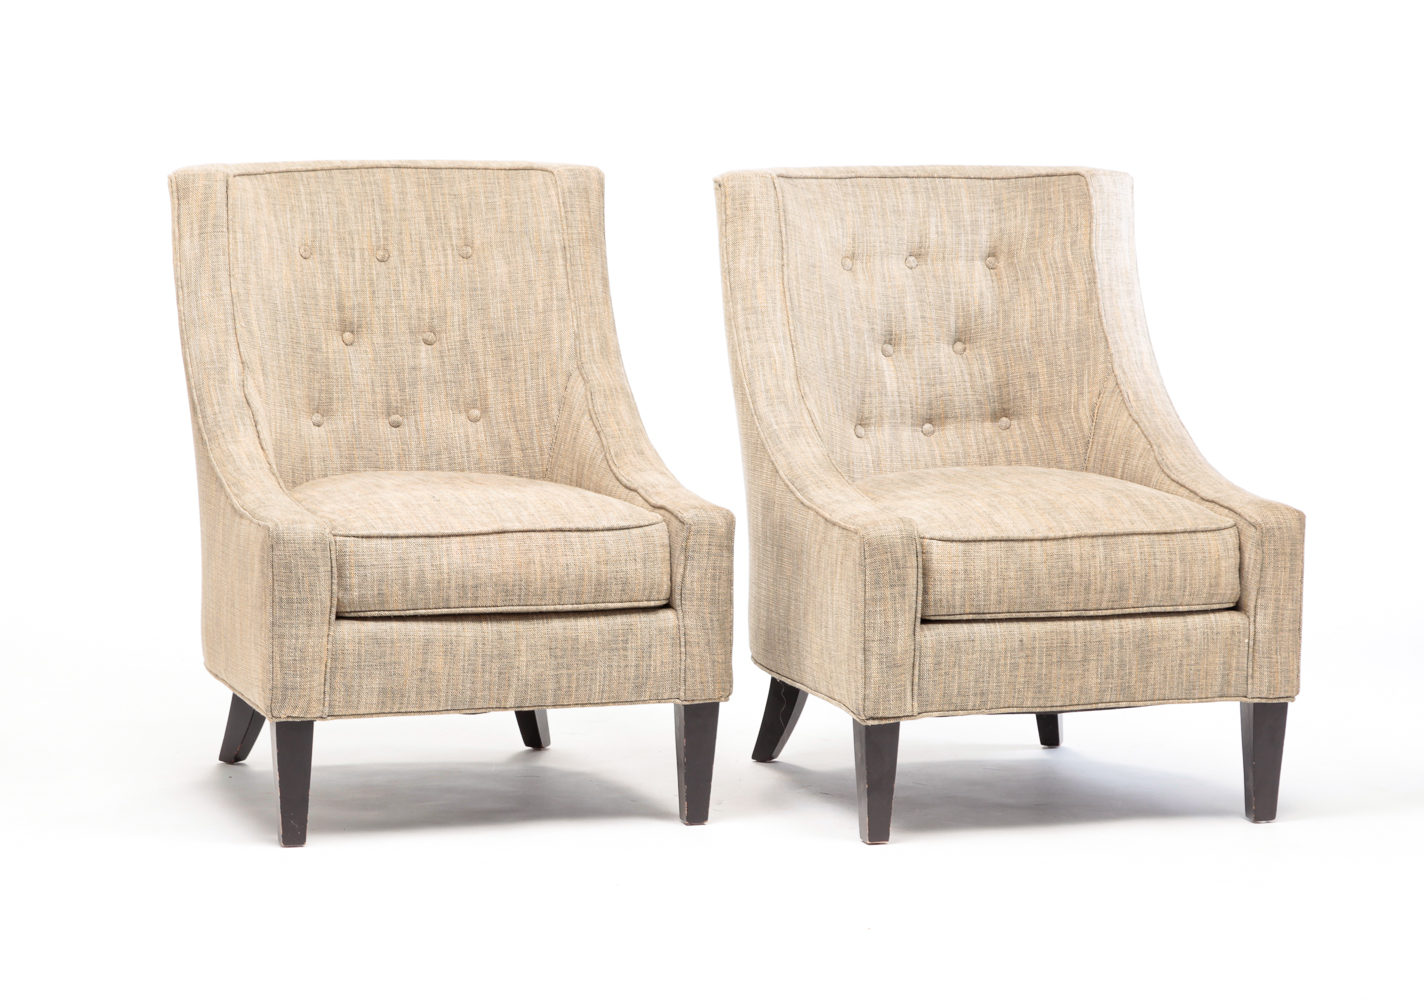 PAIR OF CONTEMPORARY CLUB CHAIRS  2e02ee